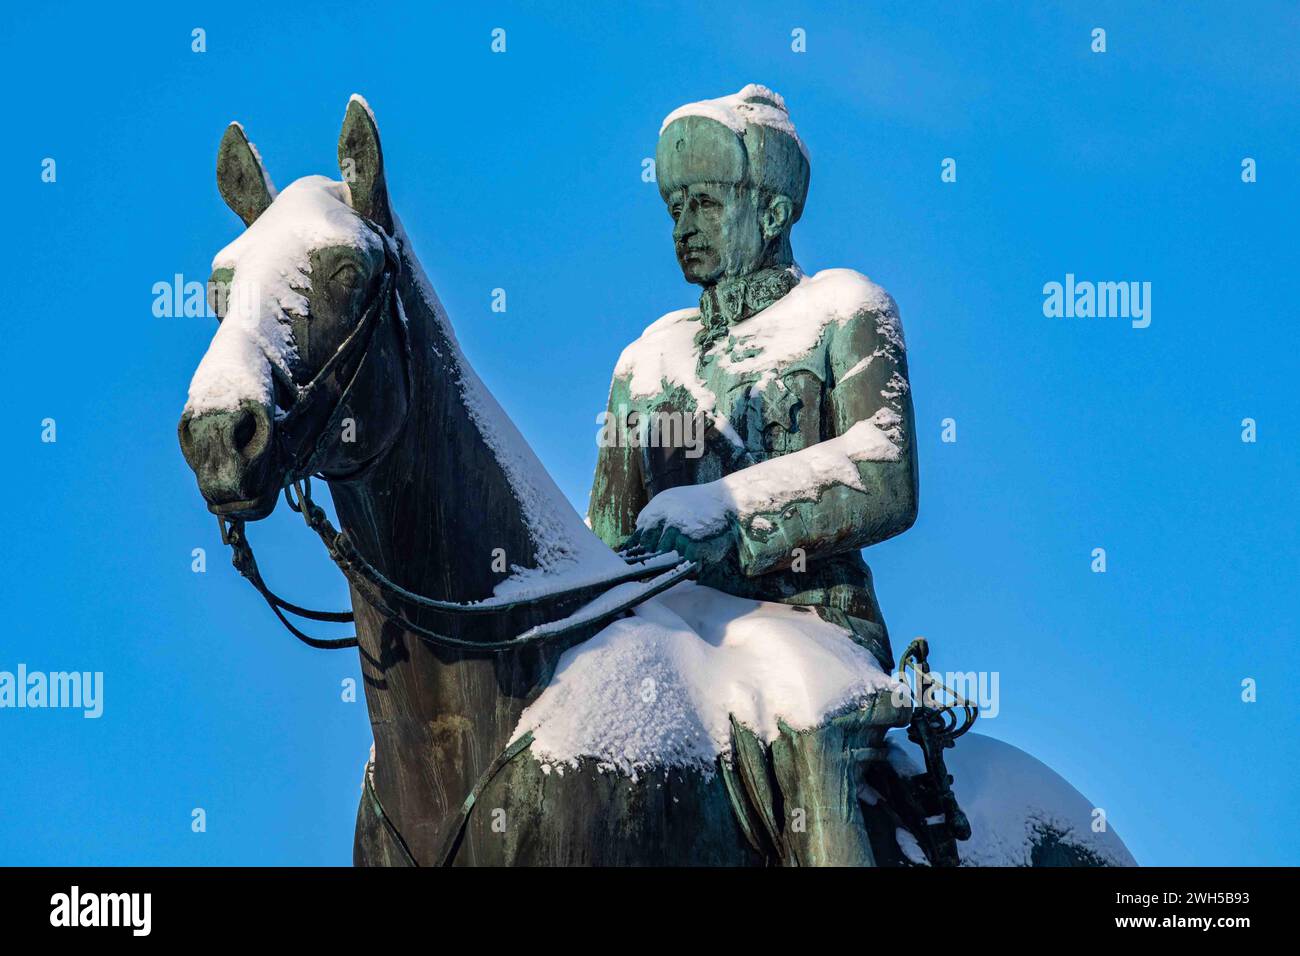 Snow on equestrian statue of Marshal Mannerheim, erected in 1960, against clear blue sky in Helsinki, Finland Stock Photo